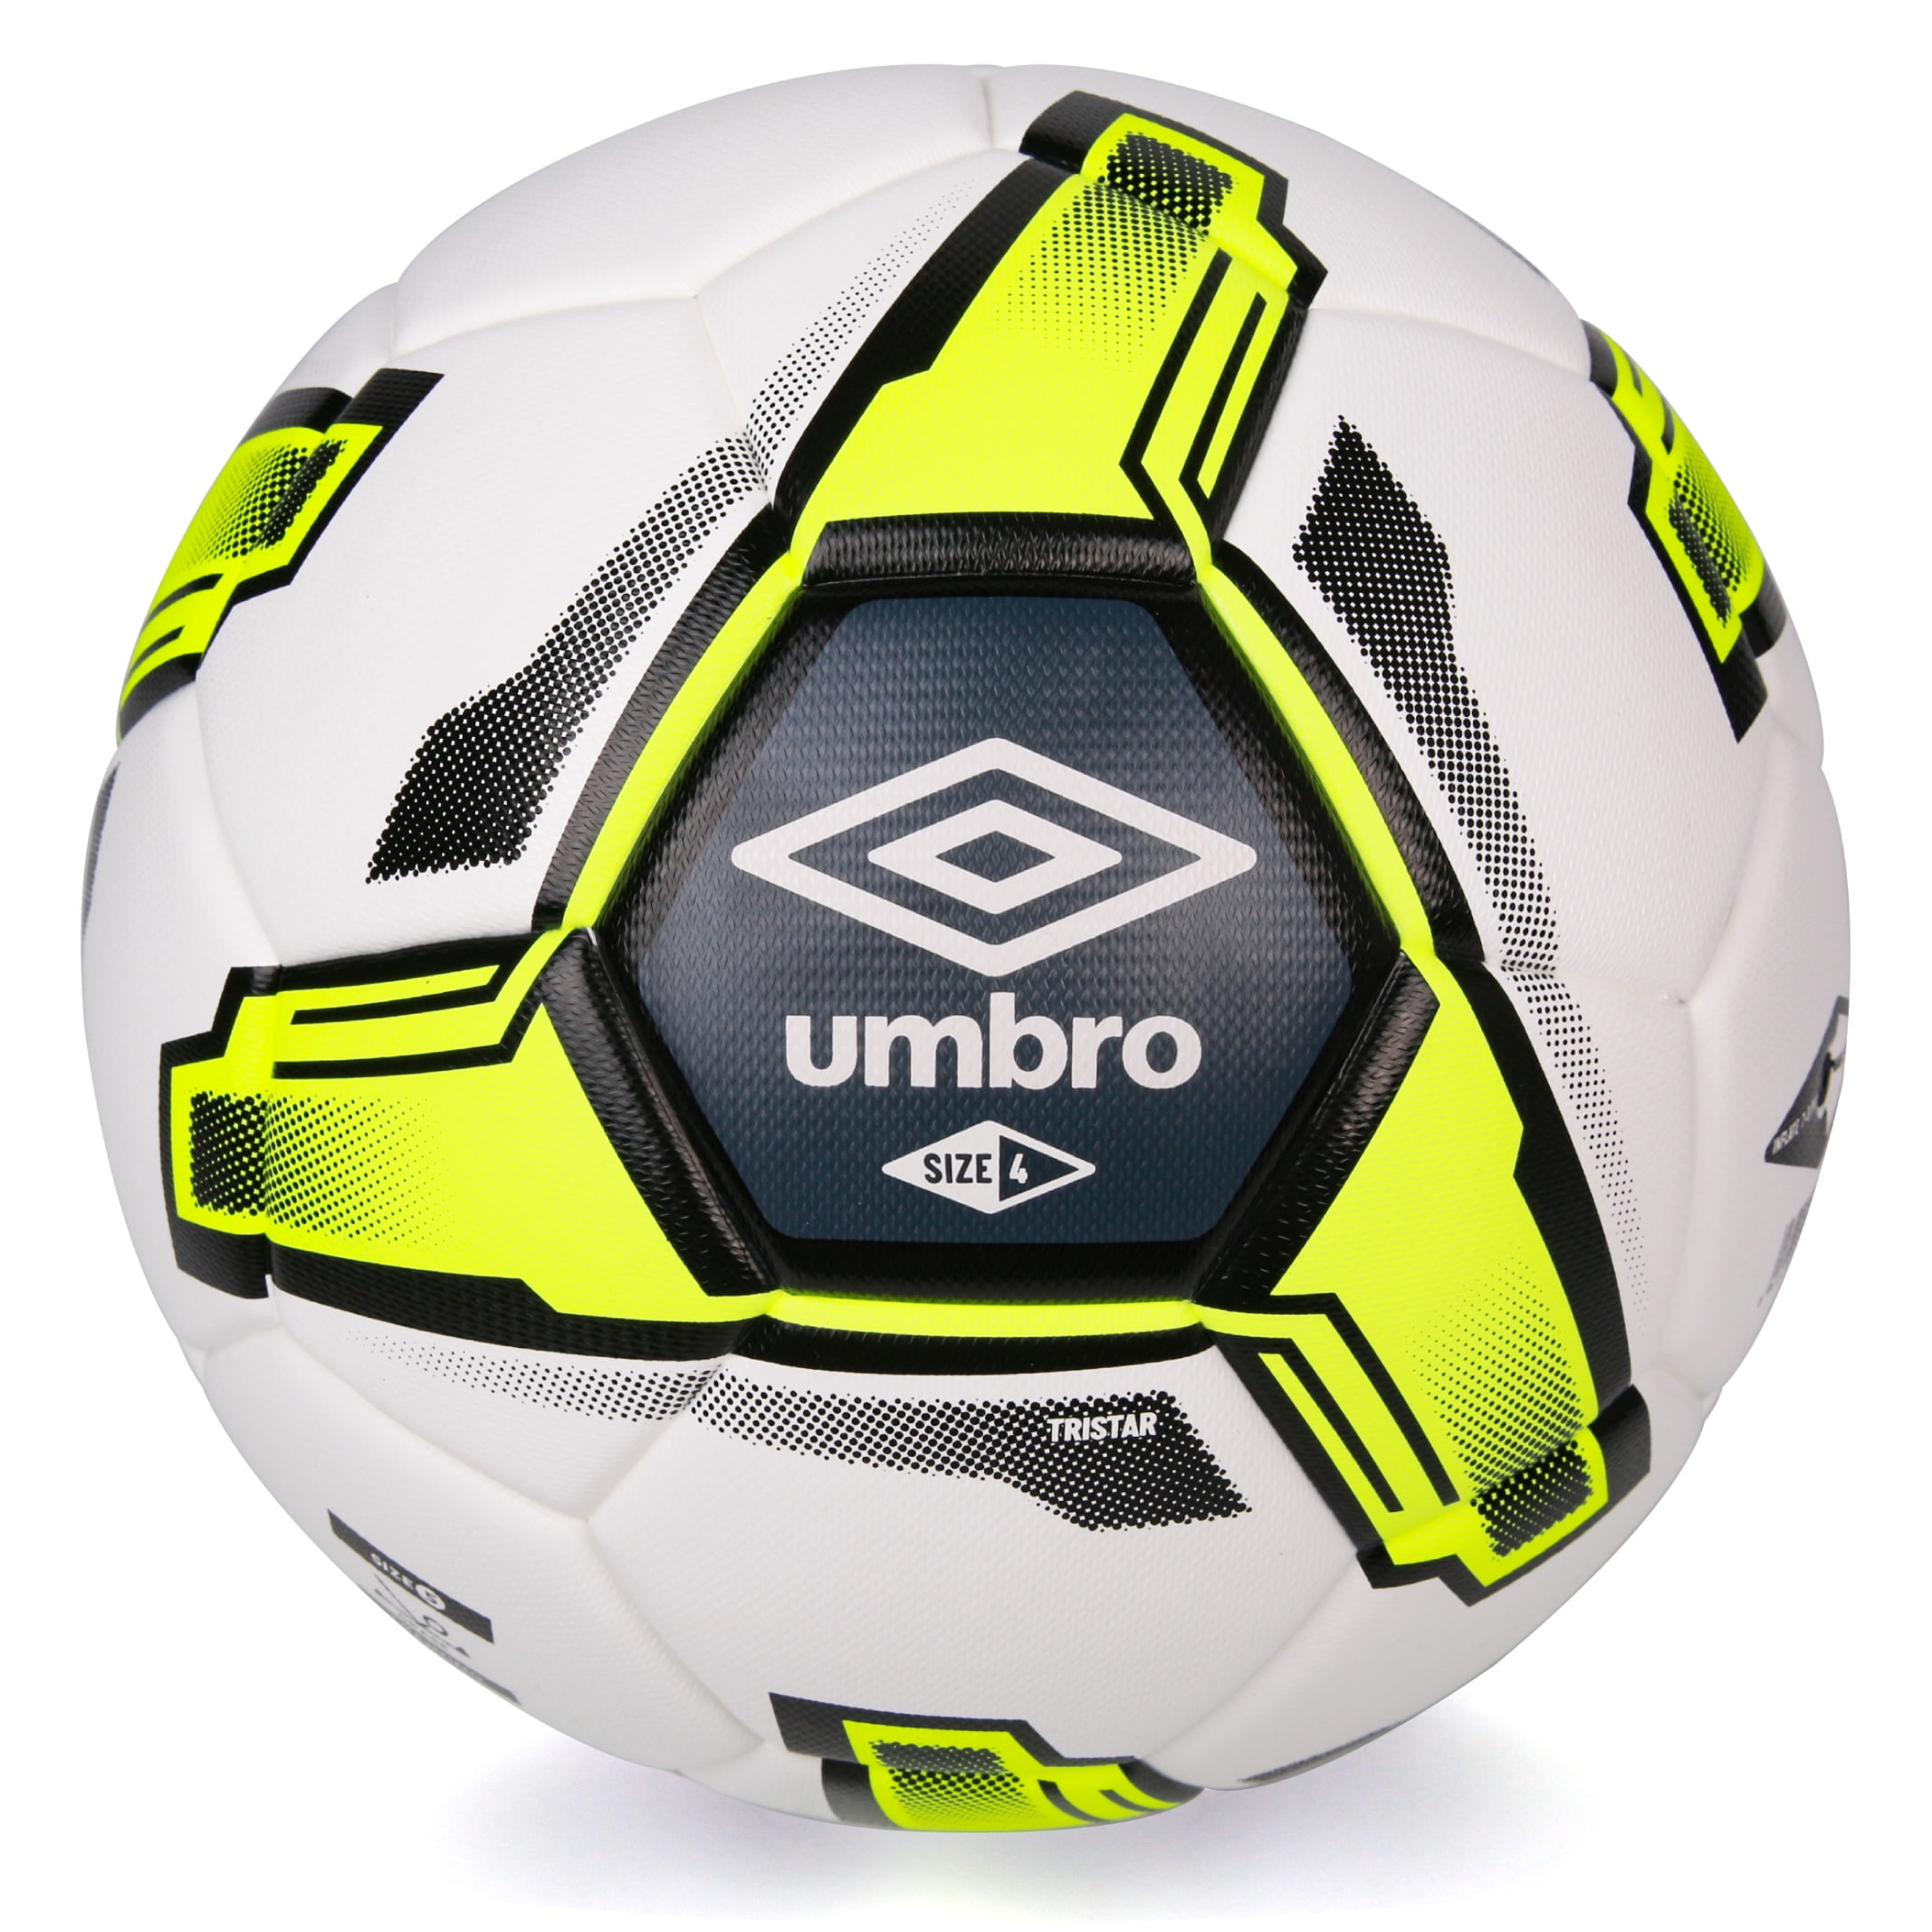 Umbro Tristar Size 4 Youth and Beginner Soccer Ball, White/Black/Yellow ...